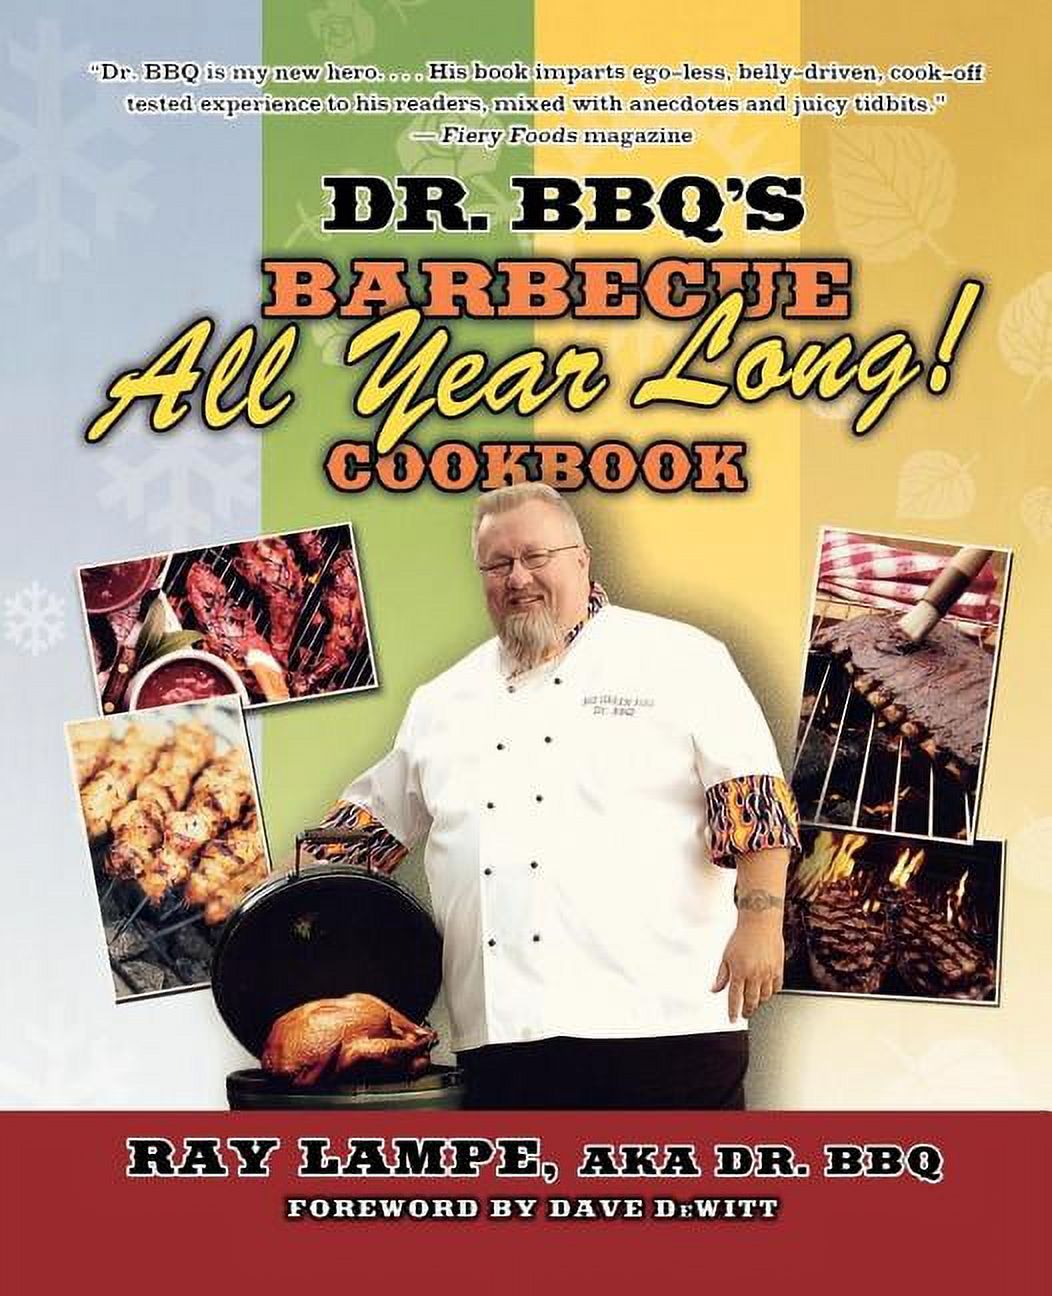 Dr. BBQ: Dr. BBQ's "Barbecue All Year Long!" Cookbook (Paperback) - image 1 of 1